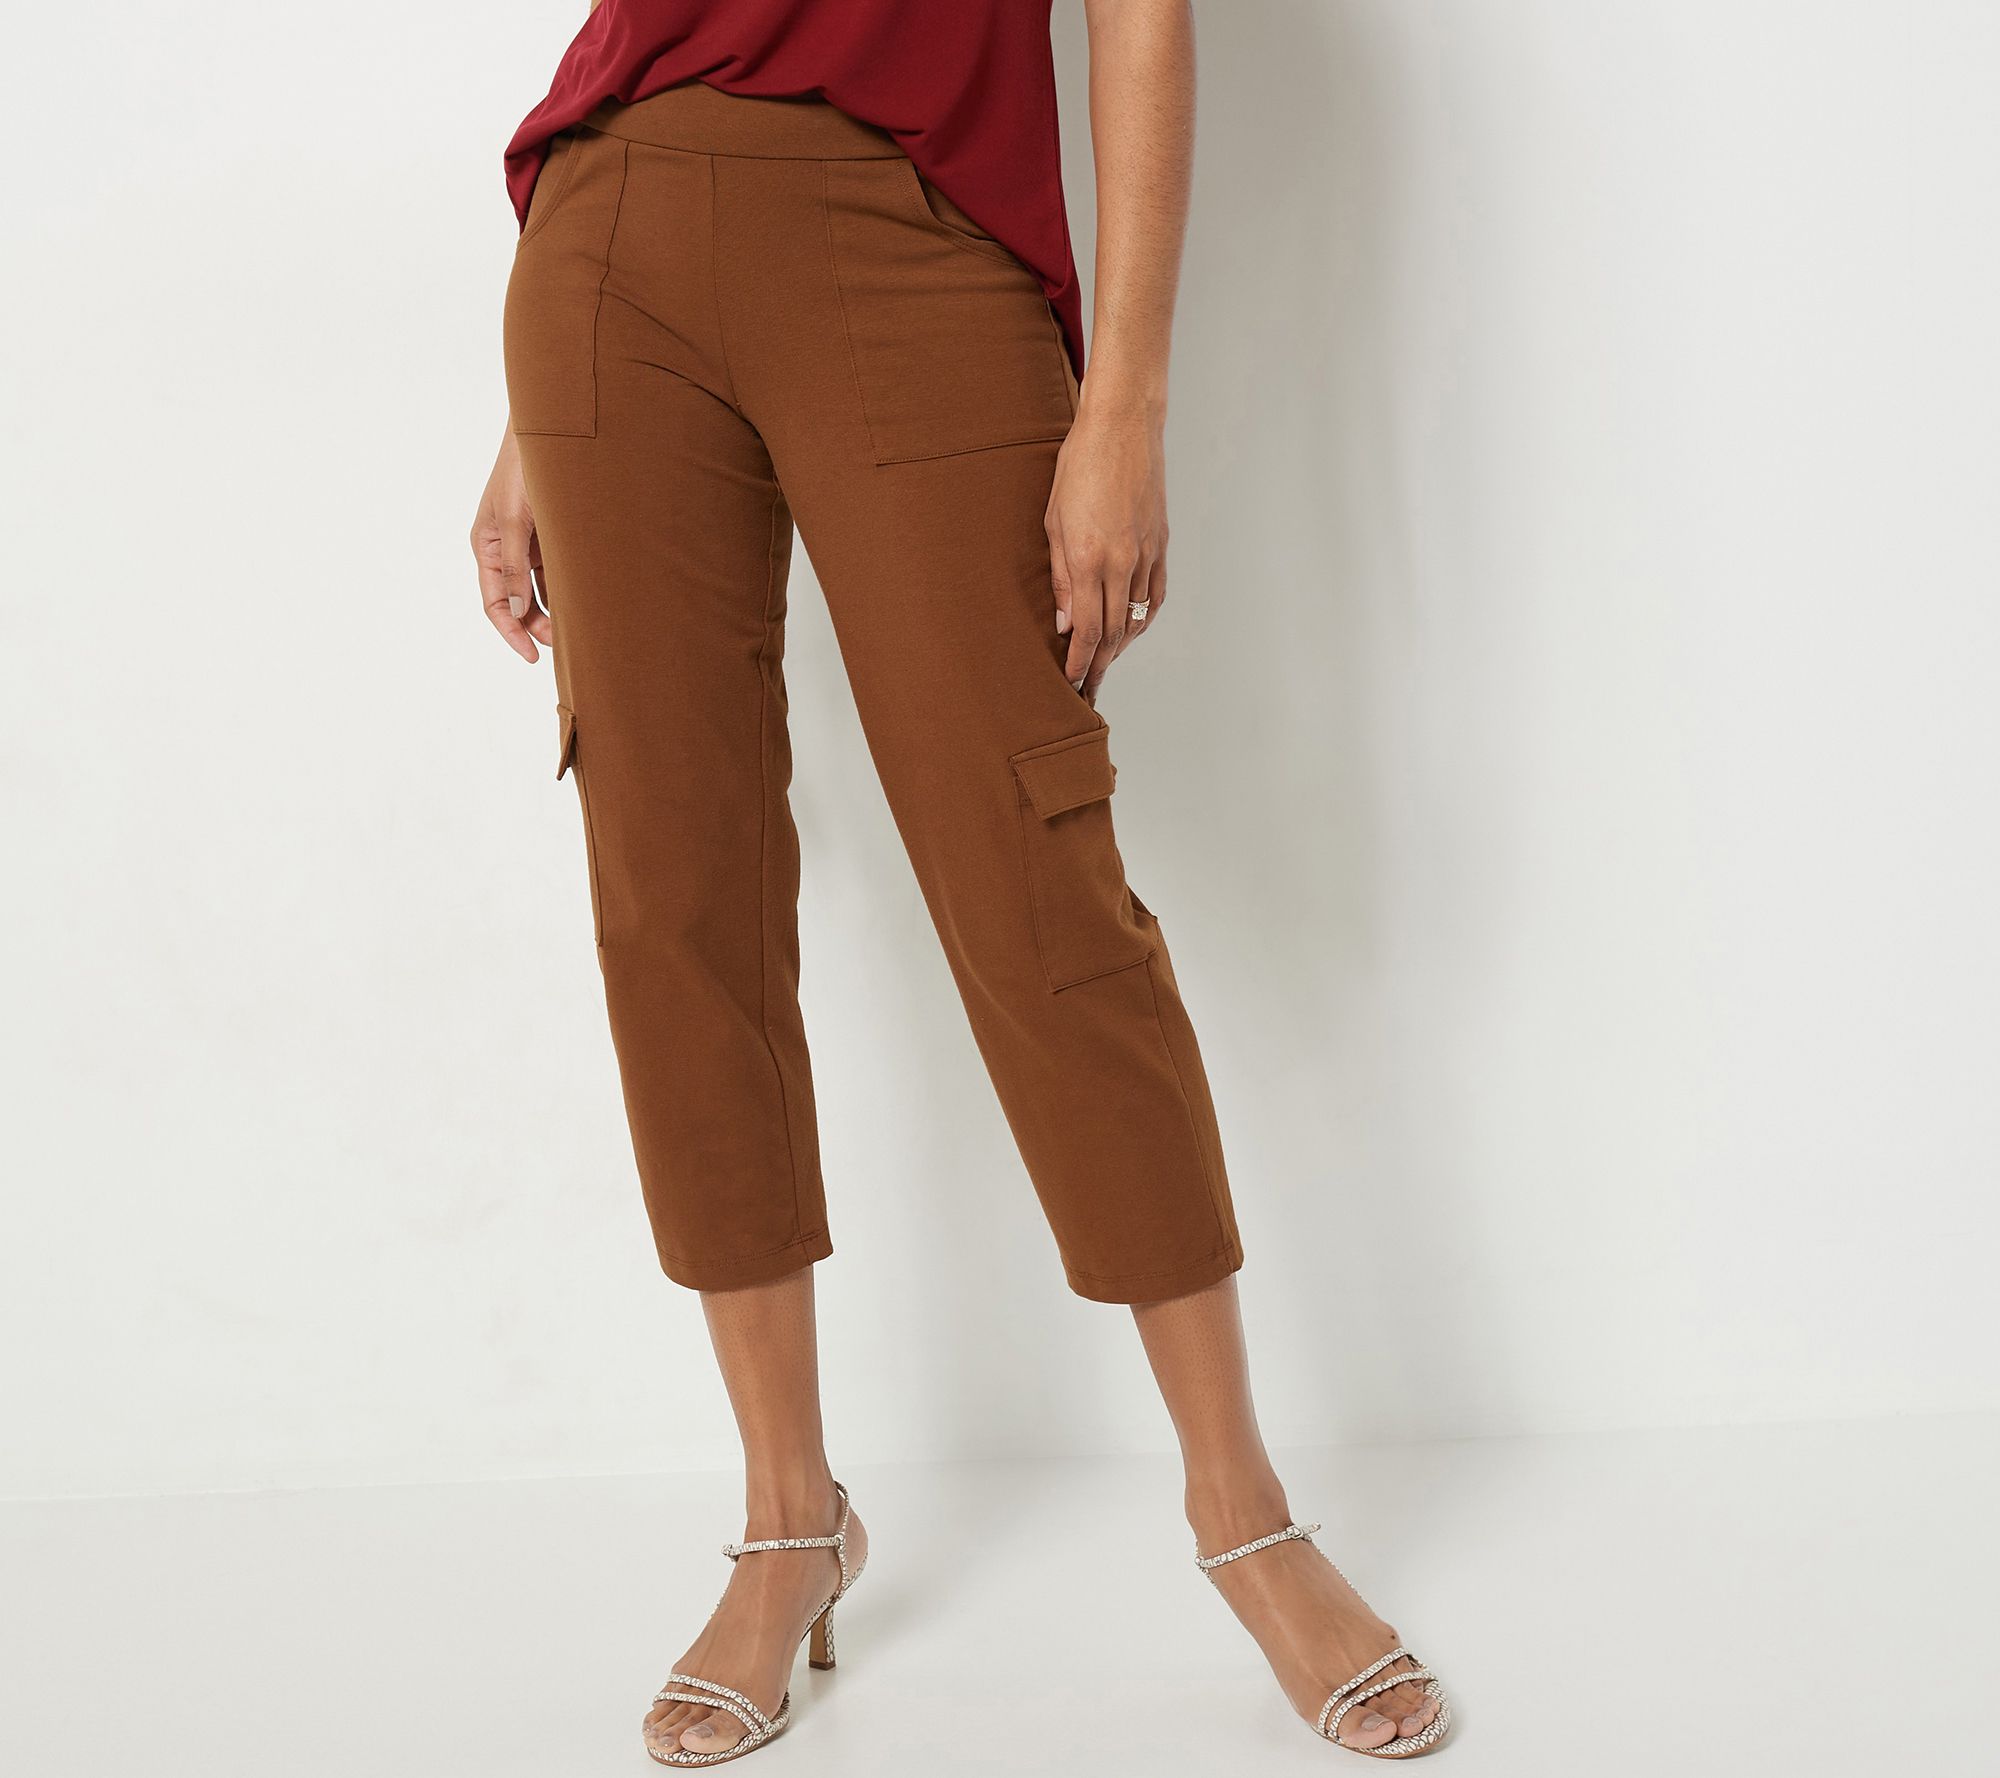 Wicked by Women with Control Regular Capri Pants w/ Pockets